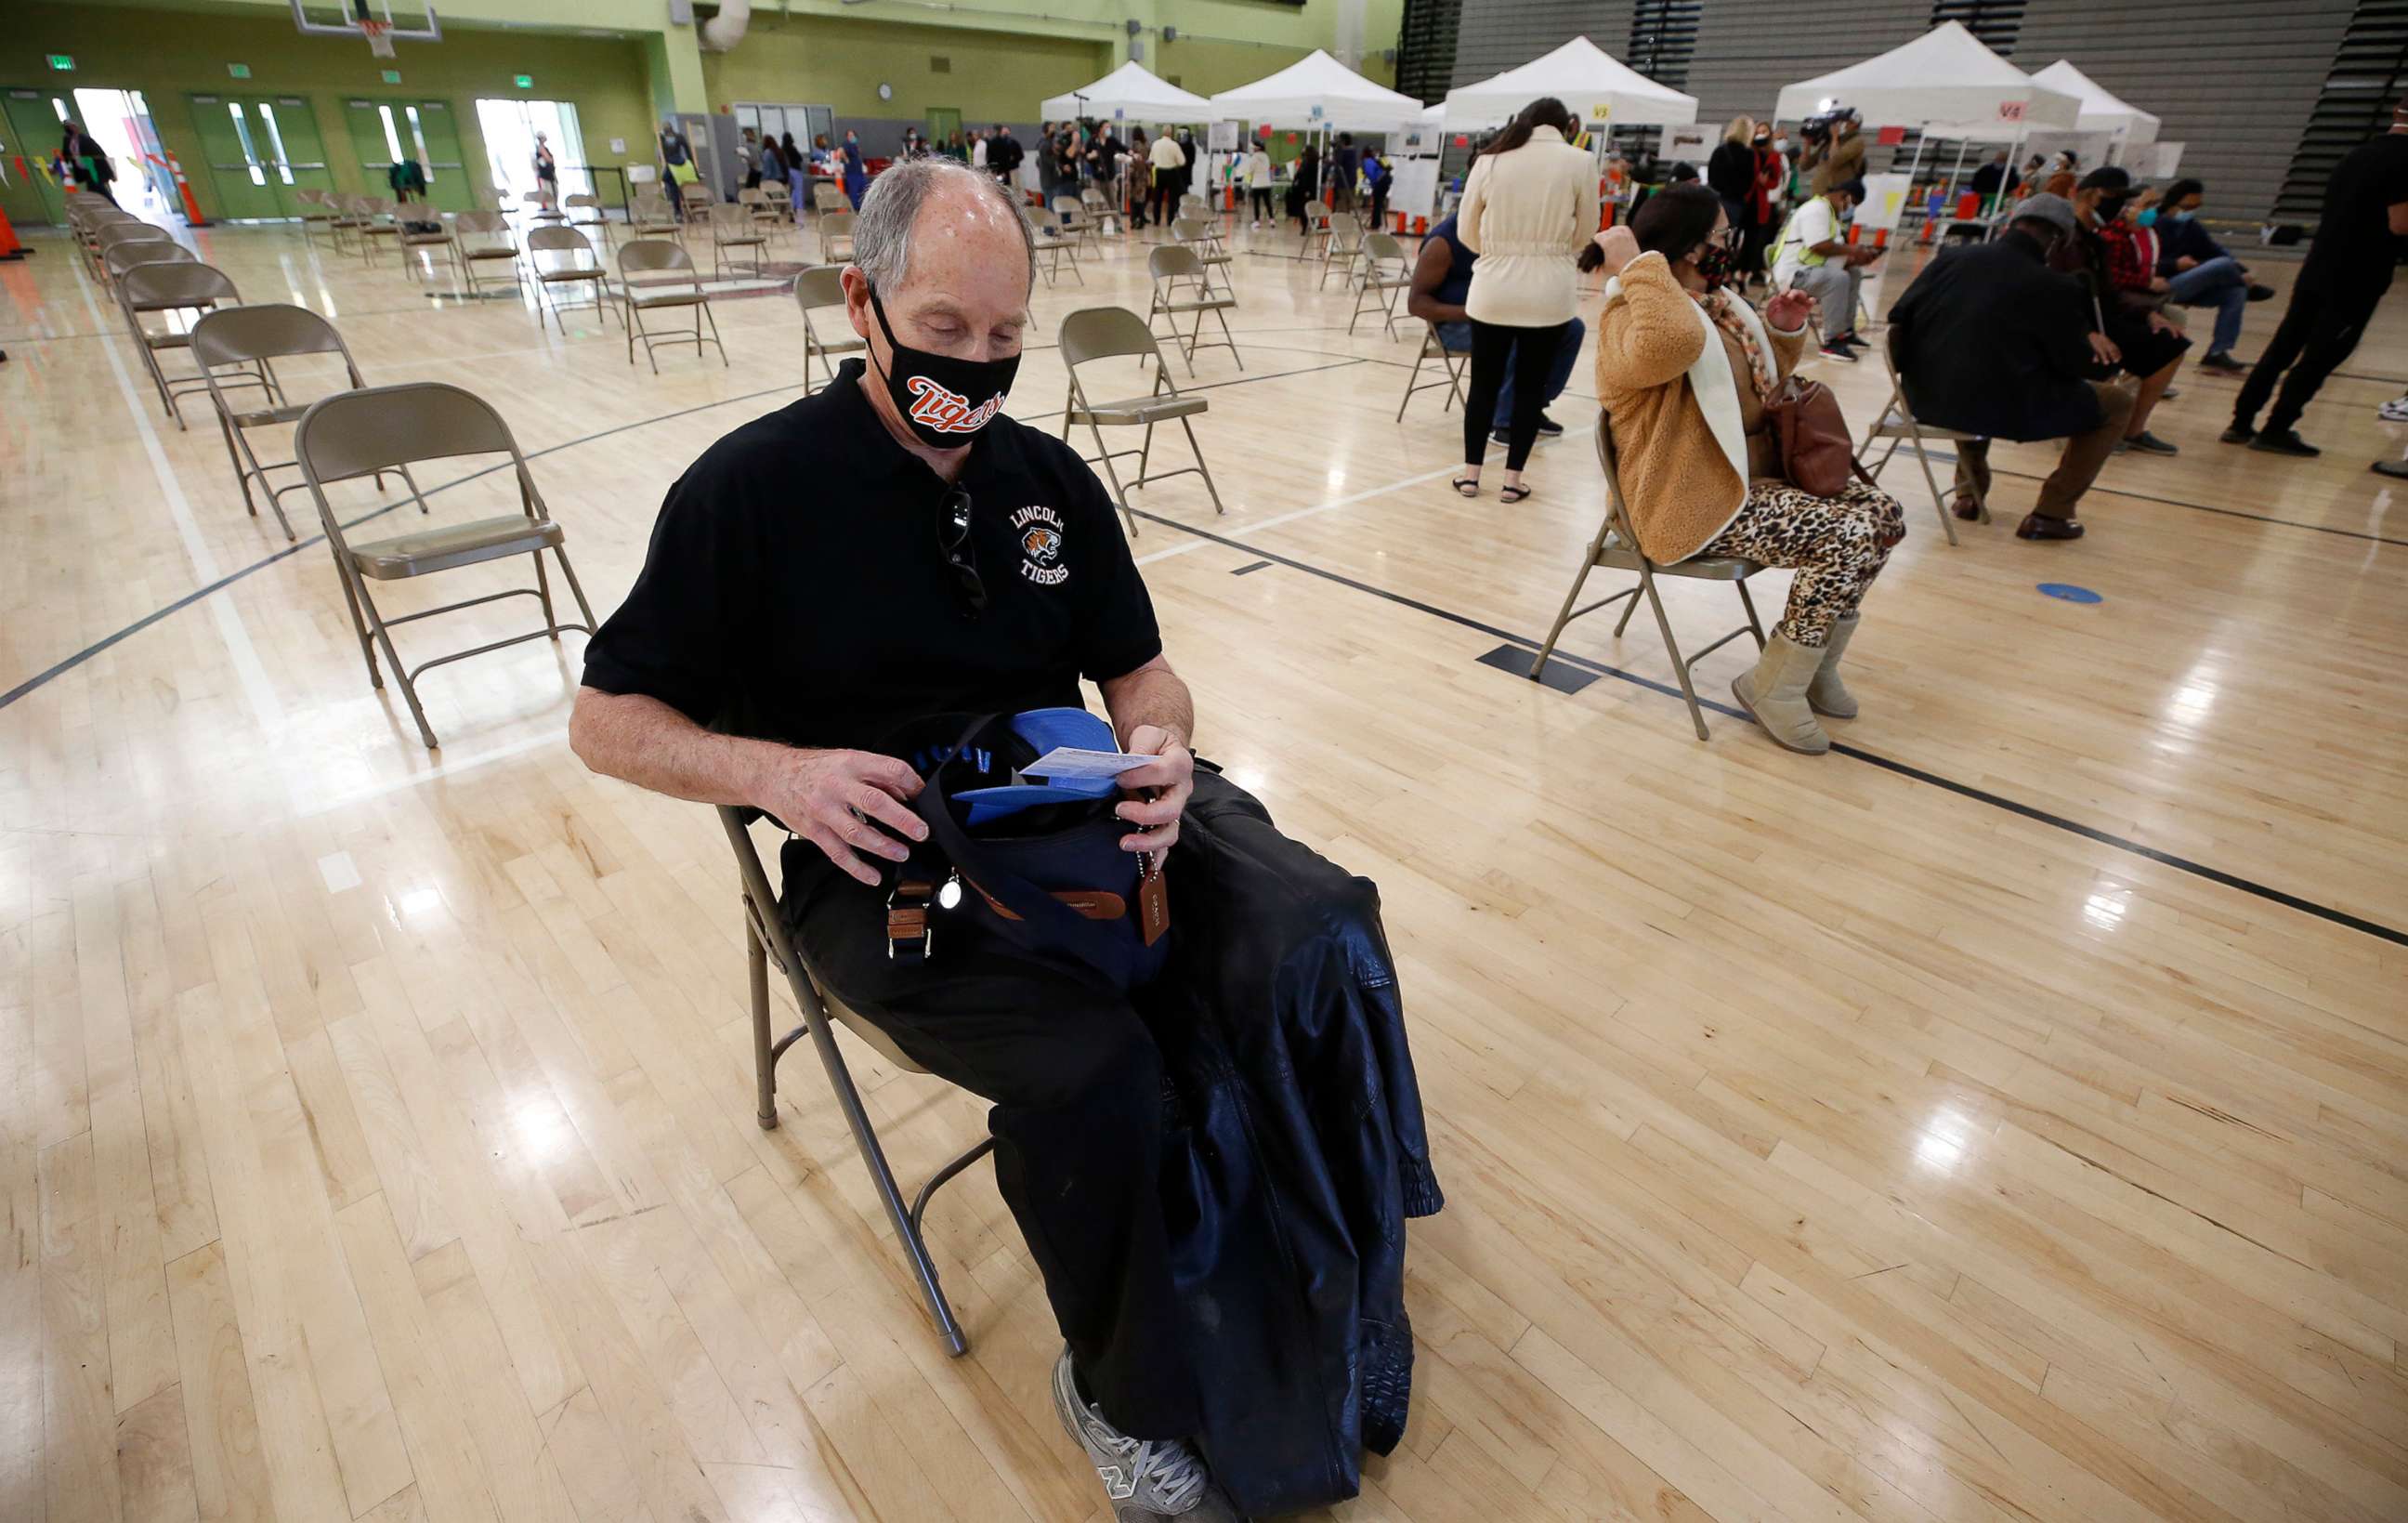 PHOTO: Lincoln High School teacher Nathan Windman, 71, waits for observation after receiving his COVID-19 vaccination as Los Angeles Unified employees received their first dose of the vaccine, Feb. 17, 2021, in Los Angeles.